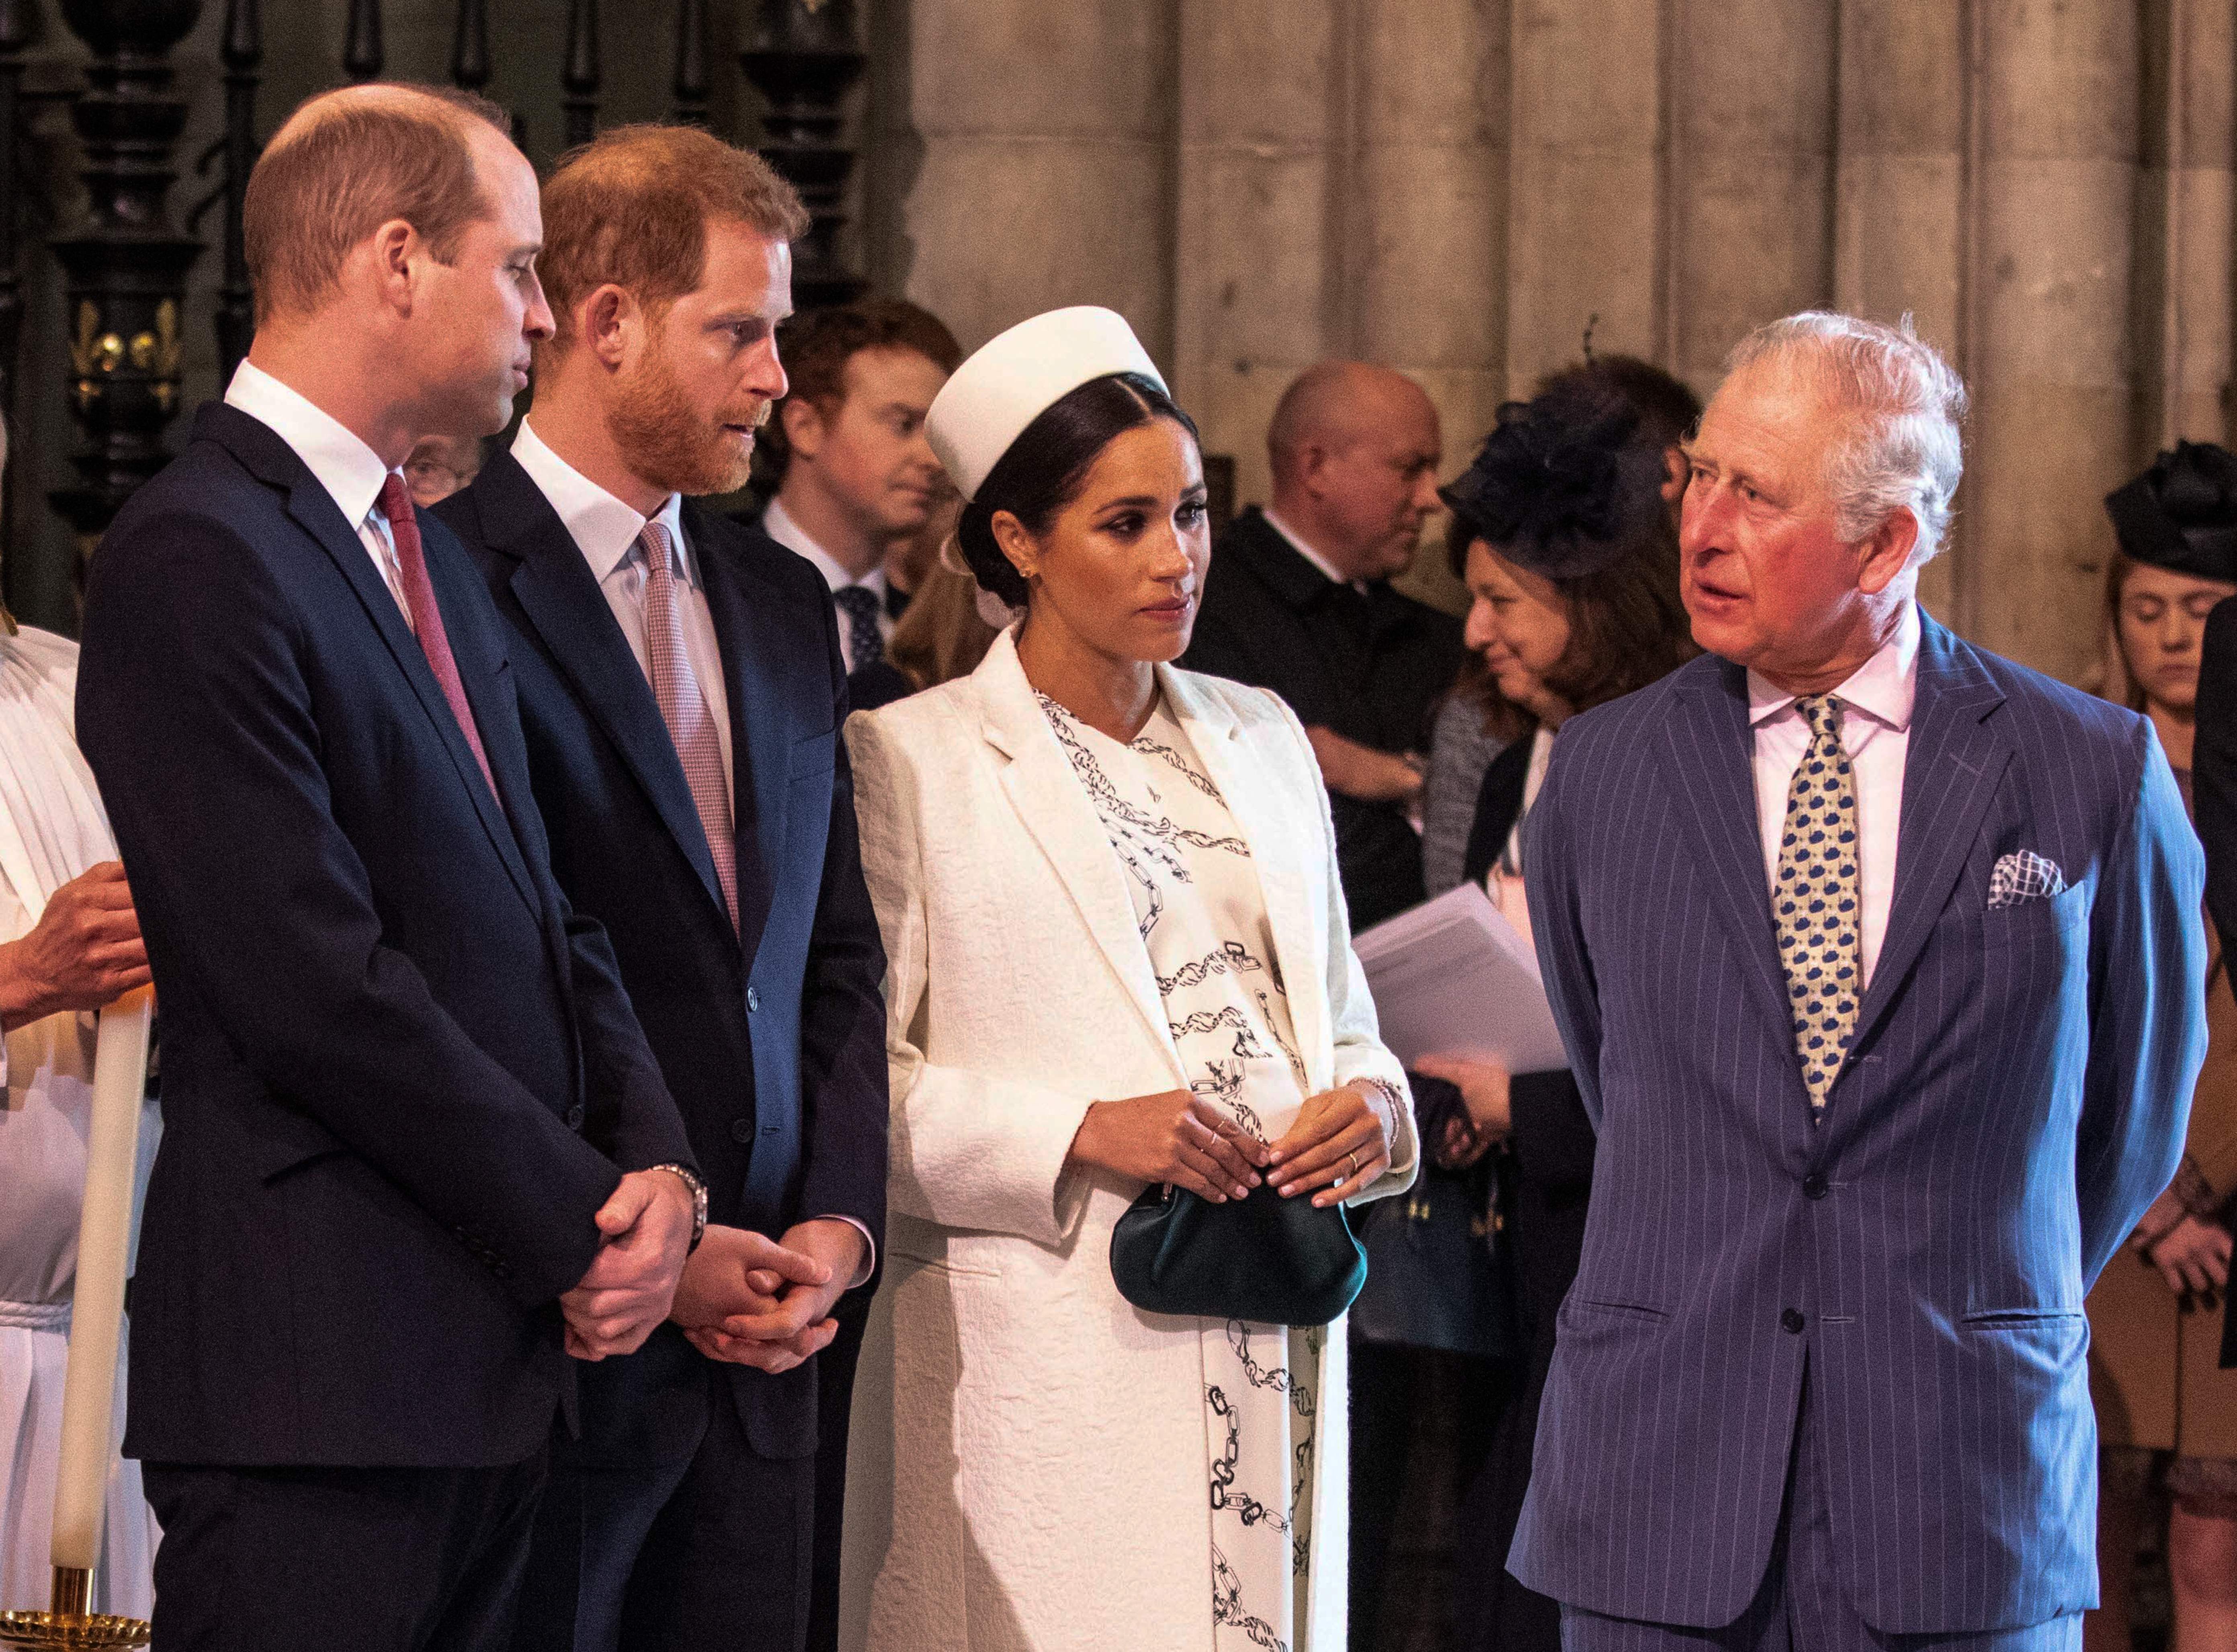 Prince William, Prince Harry, Meghan Markle, Duchess of Sussex, talk with King Charles III as they attend the Commonwealth Day service on March 11, 2019 in Westminster Abbey, London.